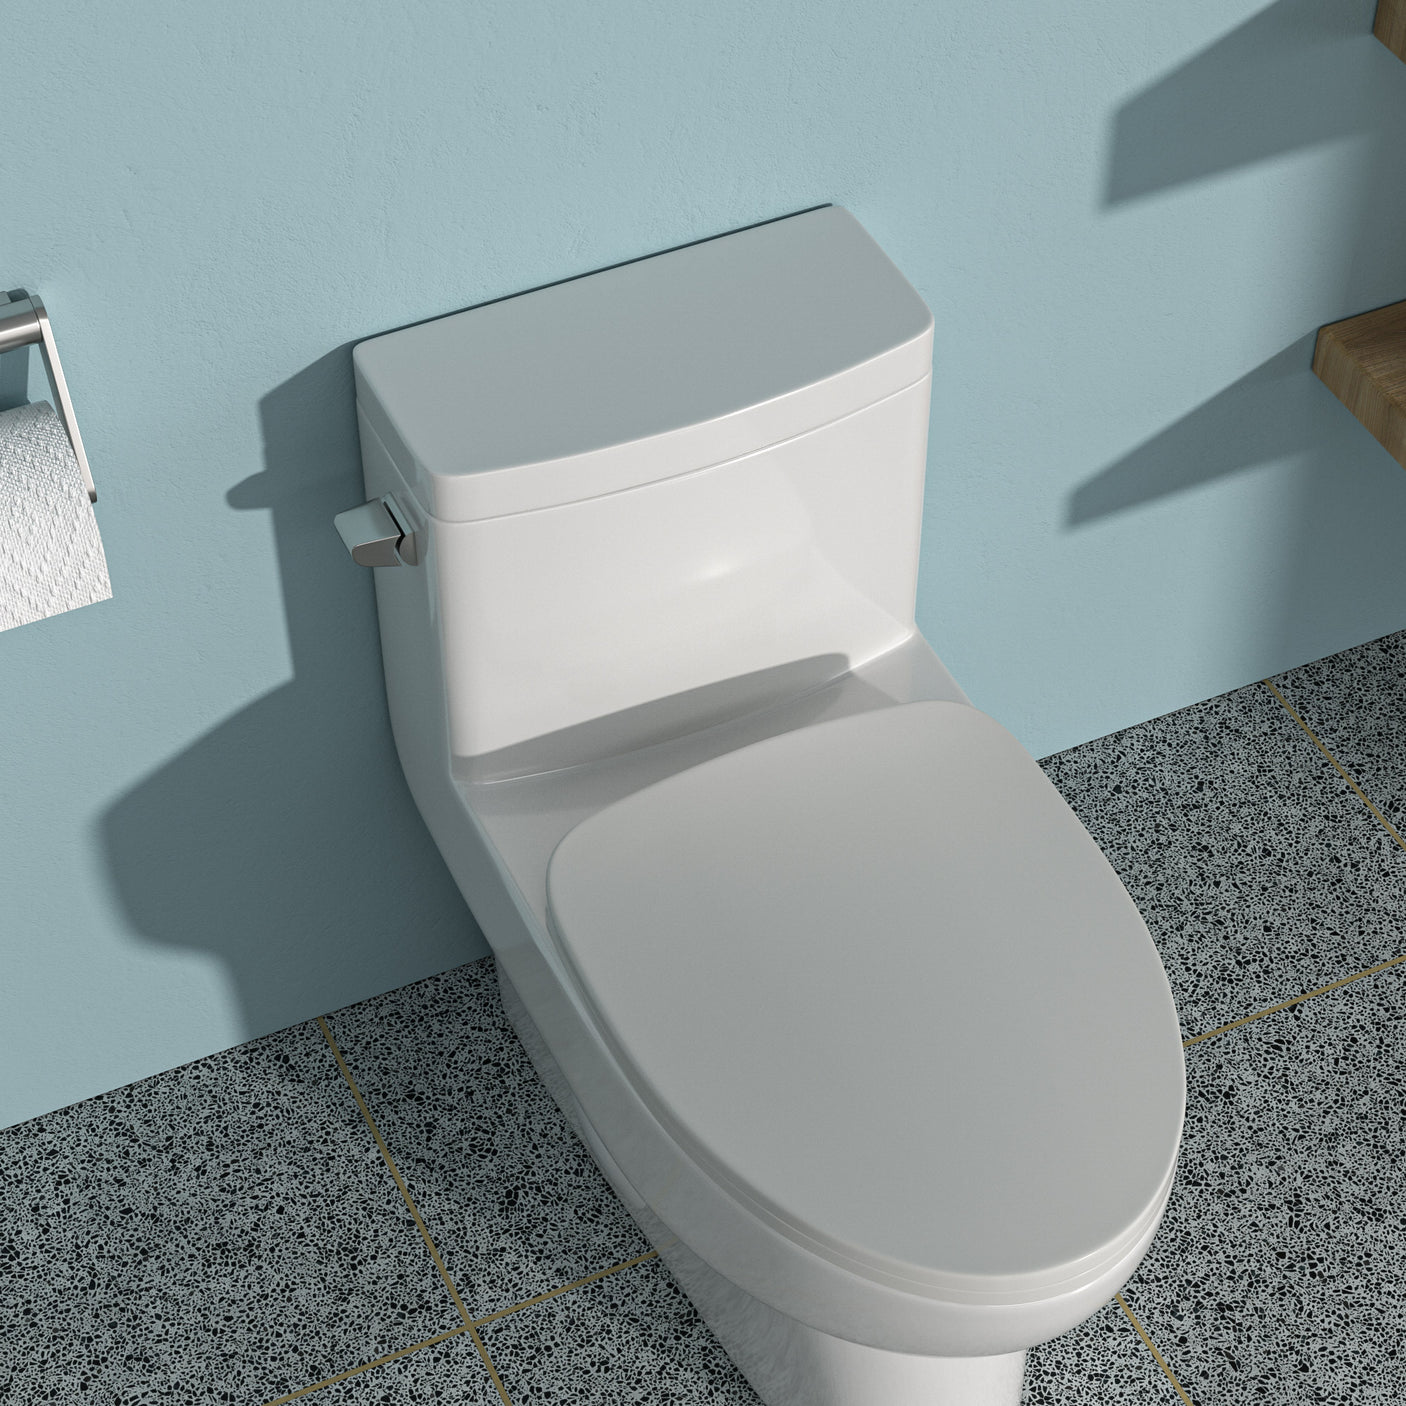 Ceramic One Piece Toilet,Single Flush with Soft Clsoing Seat